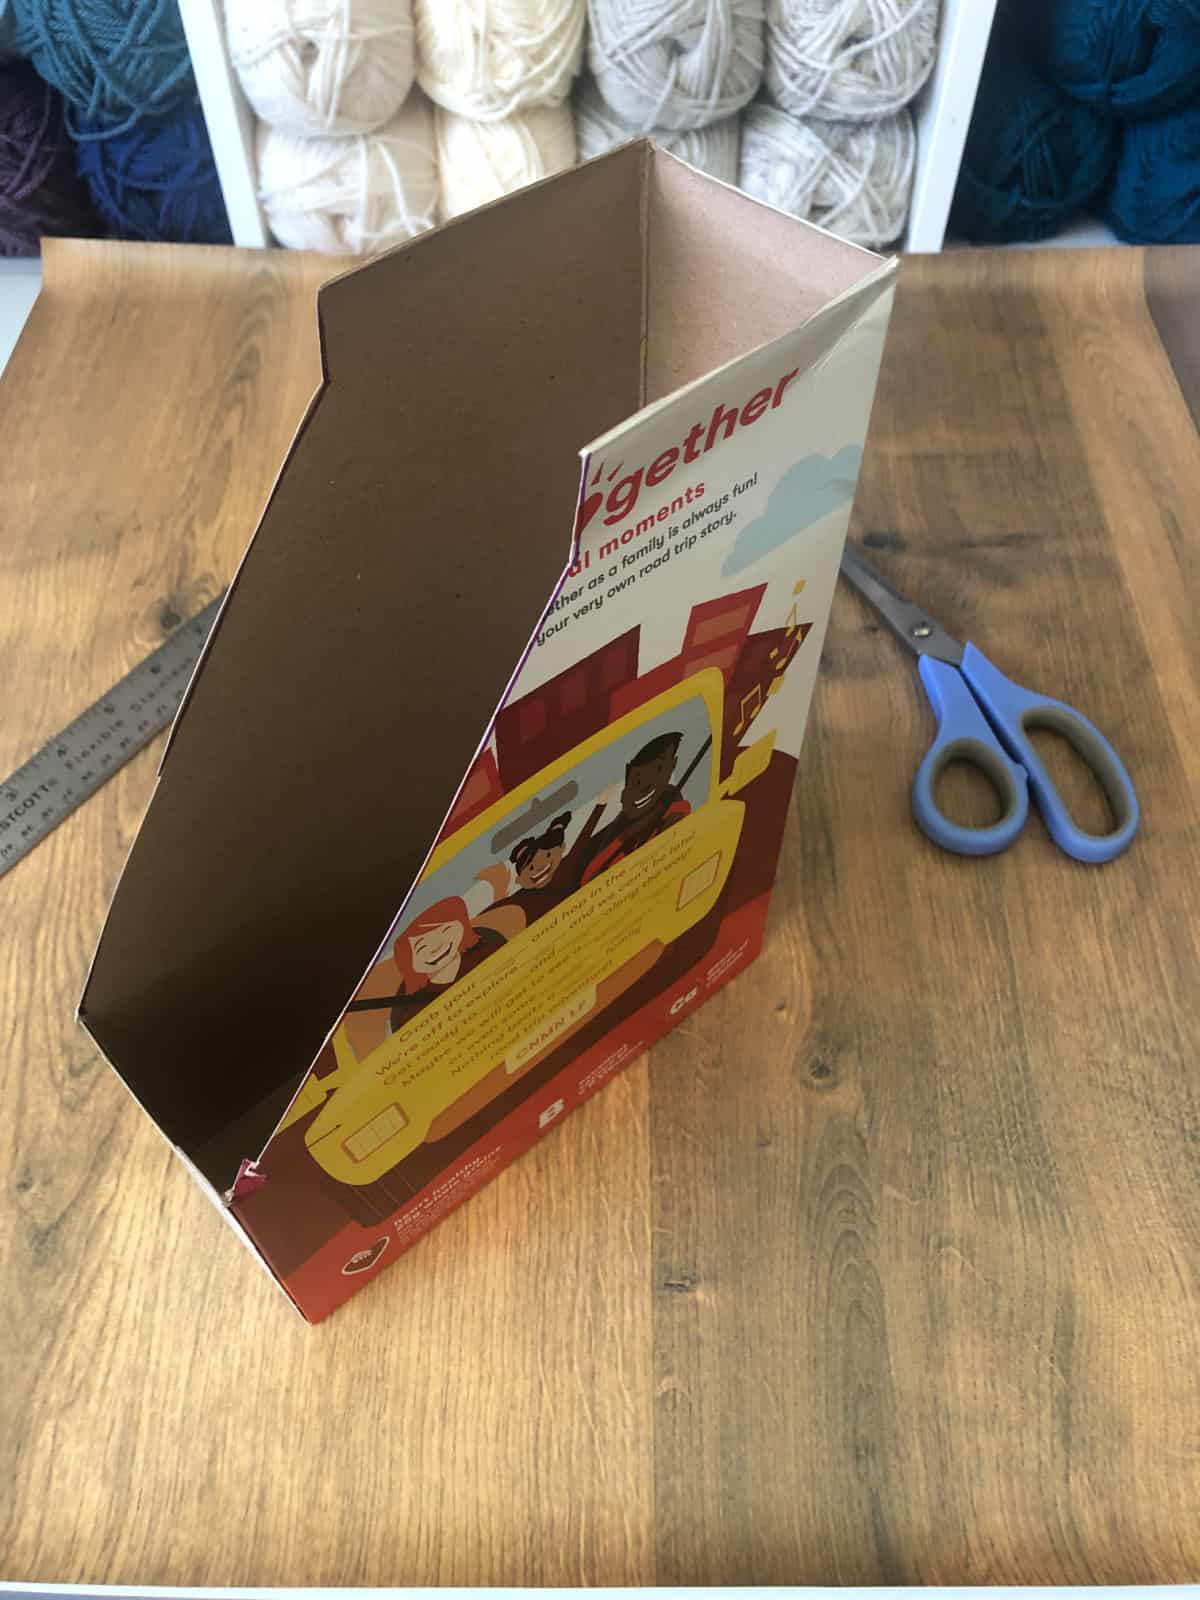 DIY cardboard notebook storage from a cereal box trimmed to size.